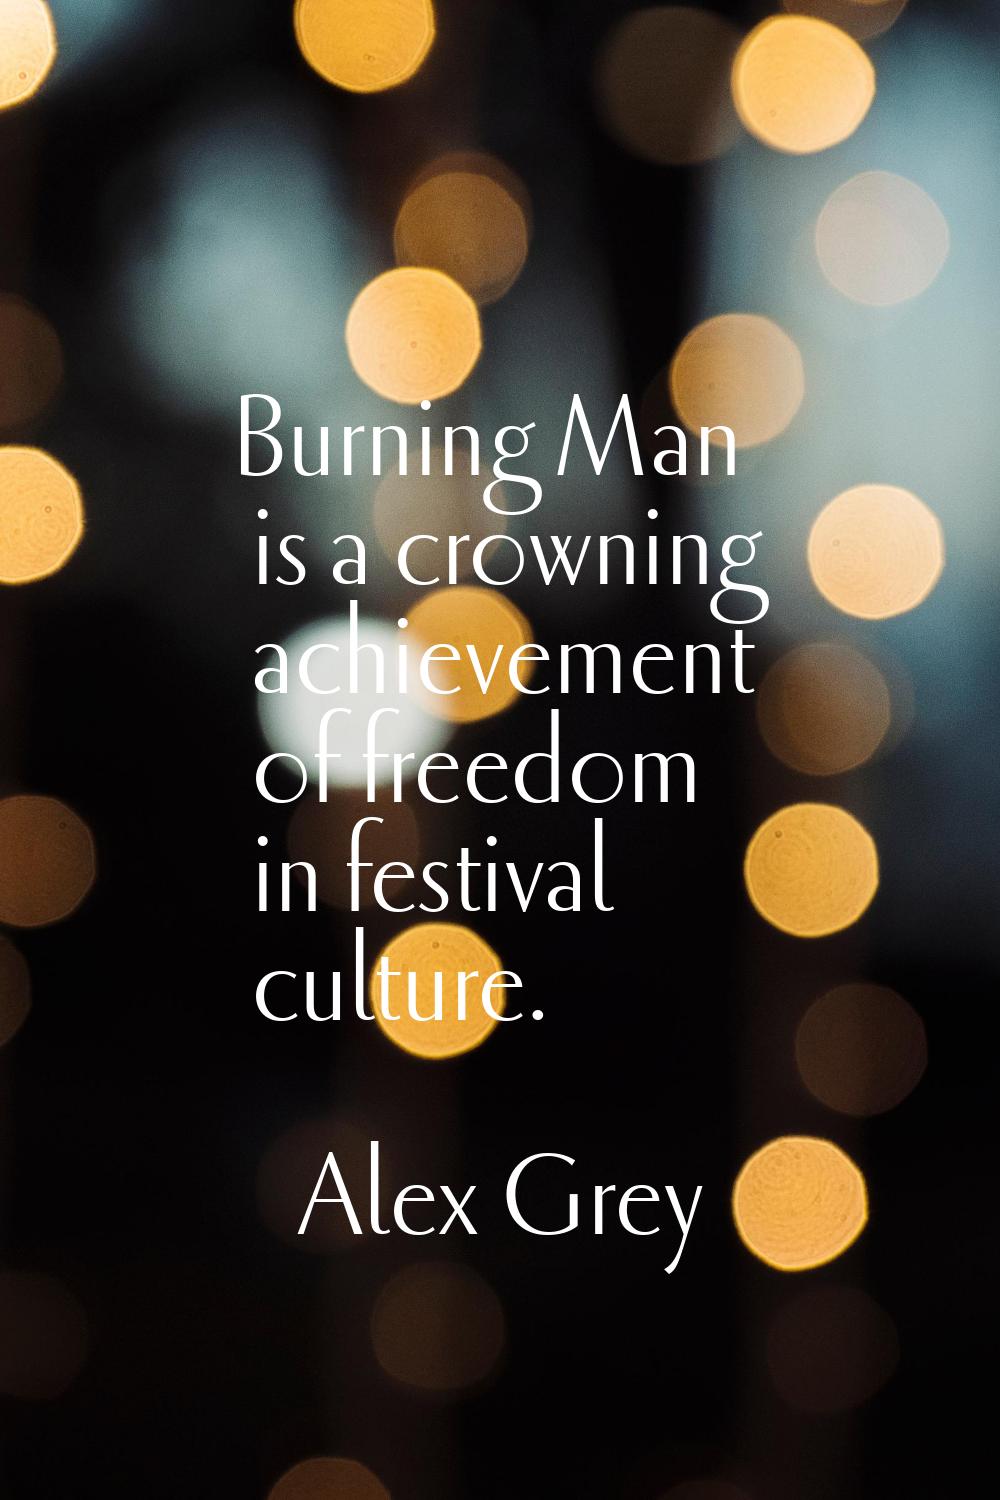 Burning Man is a crowning achievement of freedom in festival culture.